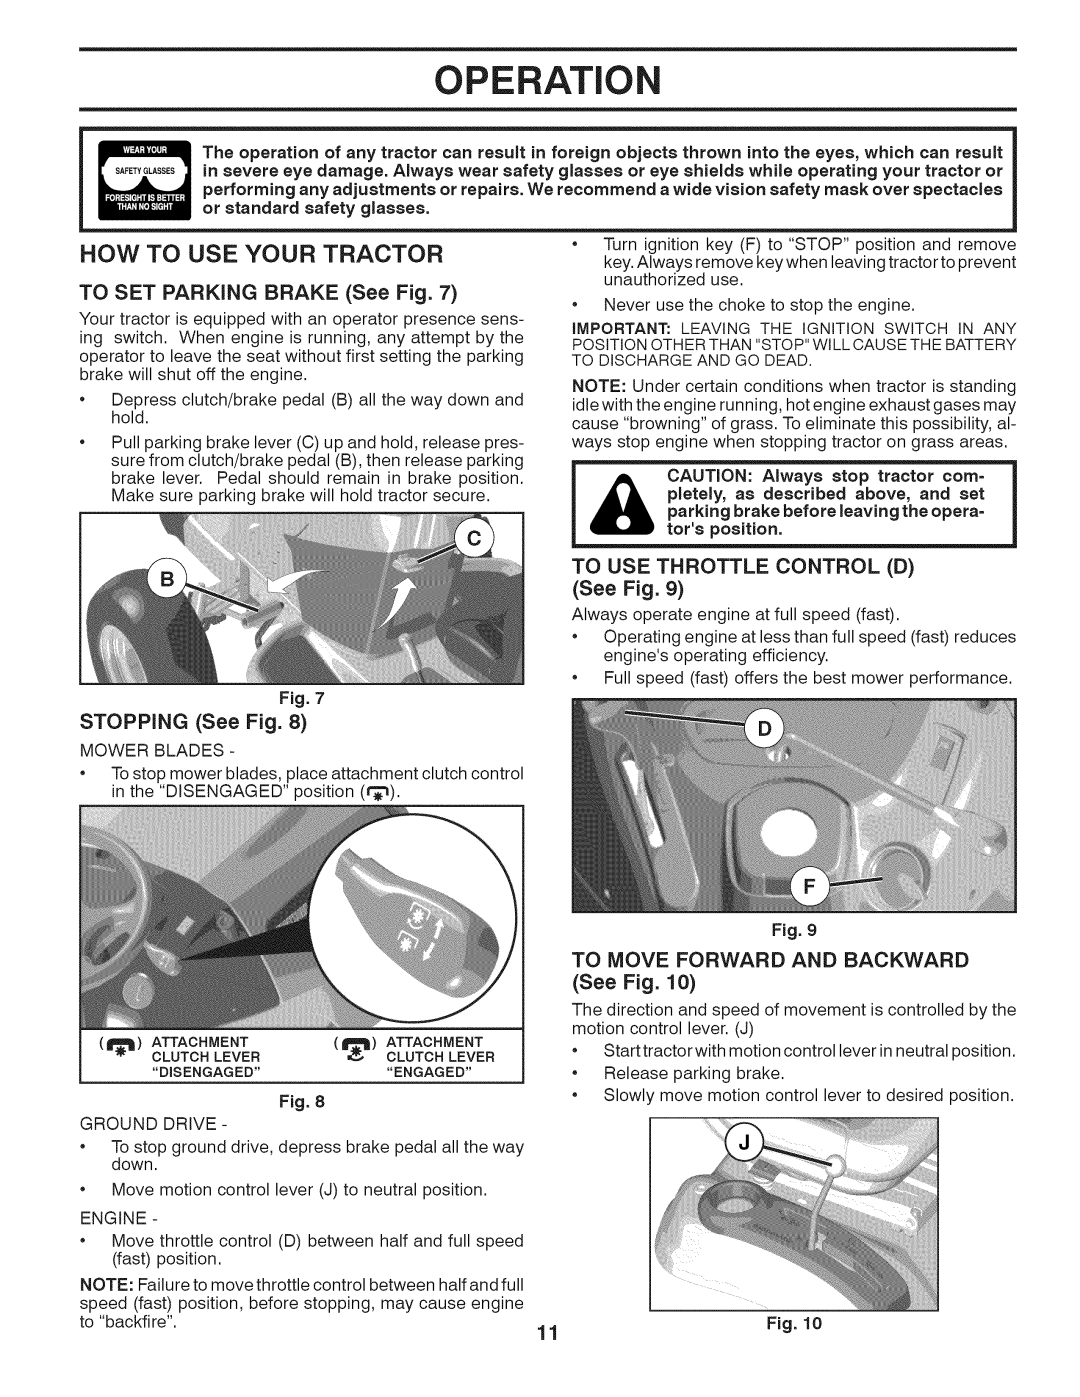 Husqvarna LTH18538 How To Use Your Tractor, Operation, TO SET PARKING BRAKE See Fig, TO USE THROTTLE CONTROL D See Fig 